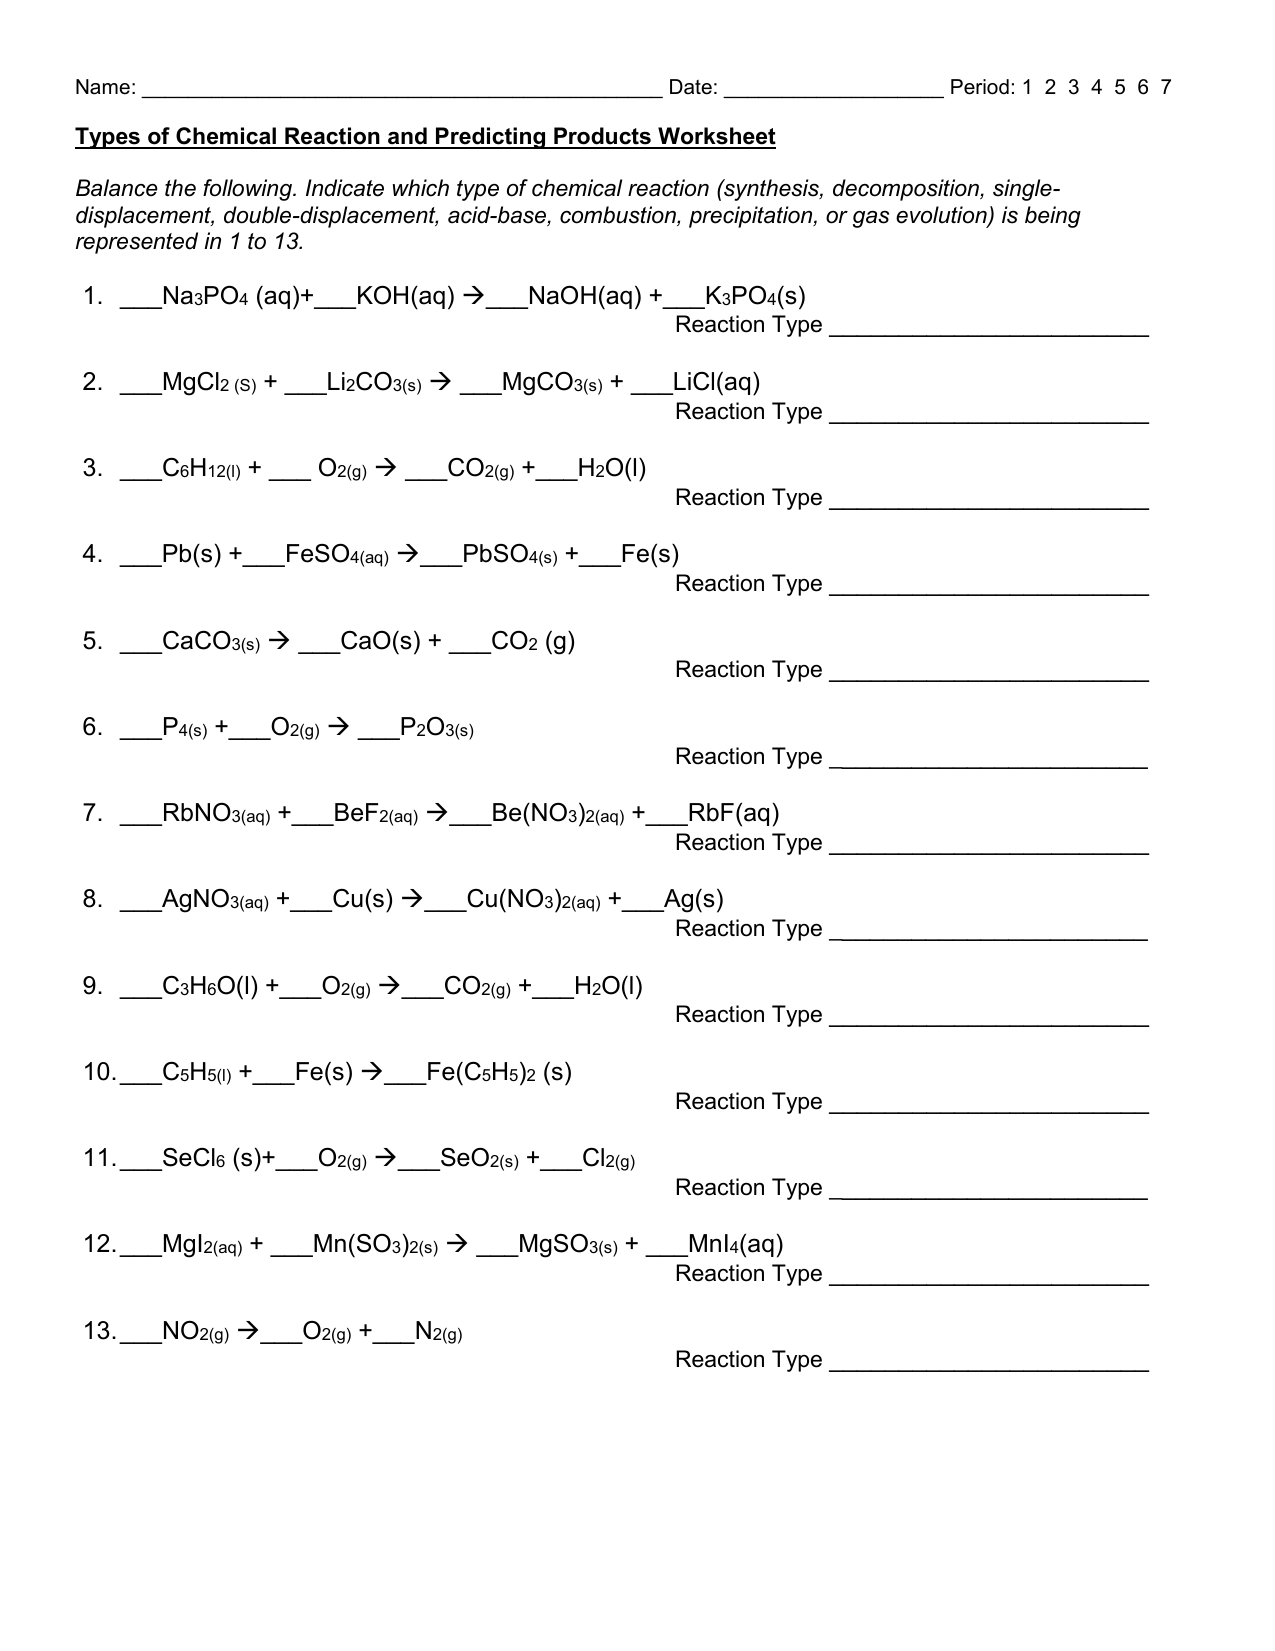 Forex action reaction worksheet differences in alcohol ethers acetone liquor